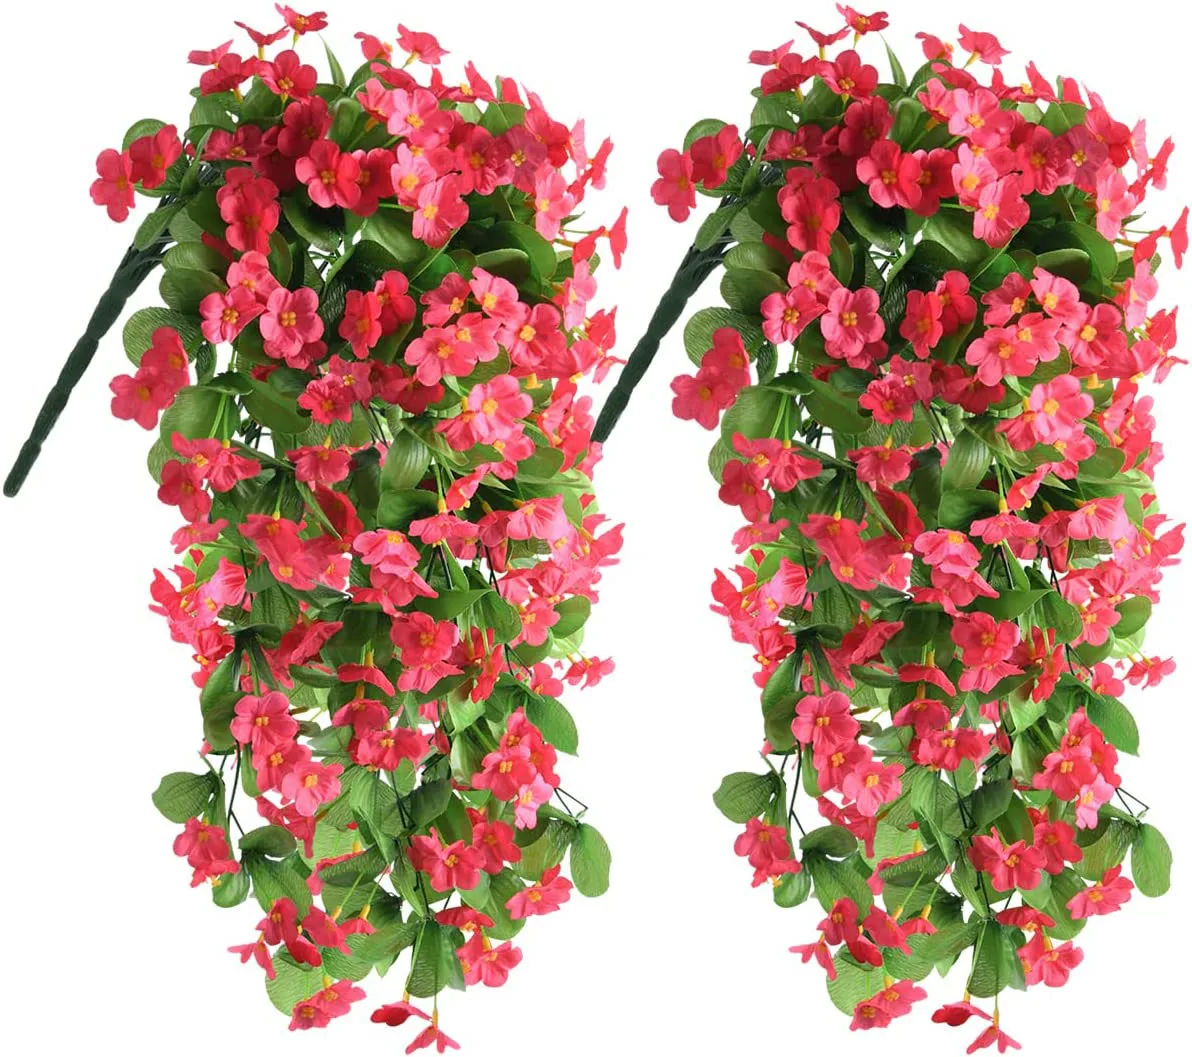 

2pcs Rose Artificial Hanging Flowers Fake Hanging Plants Orchid Flower Bouquet for Wall Home Room Garden Wedding Outdoor